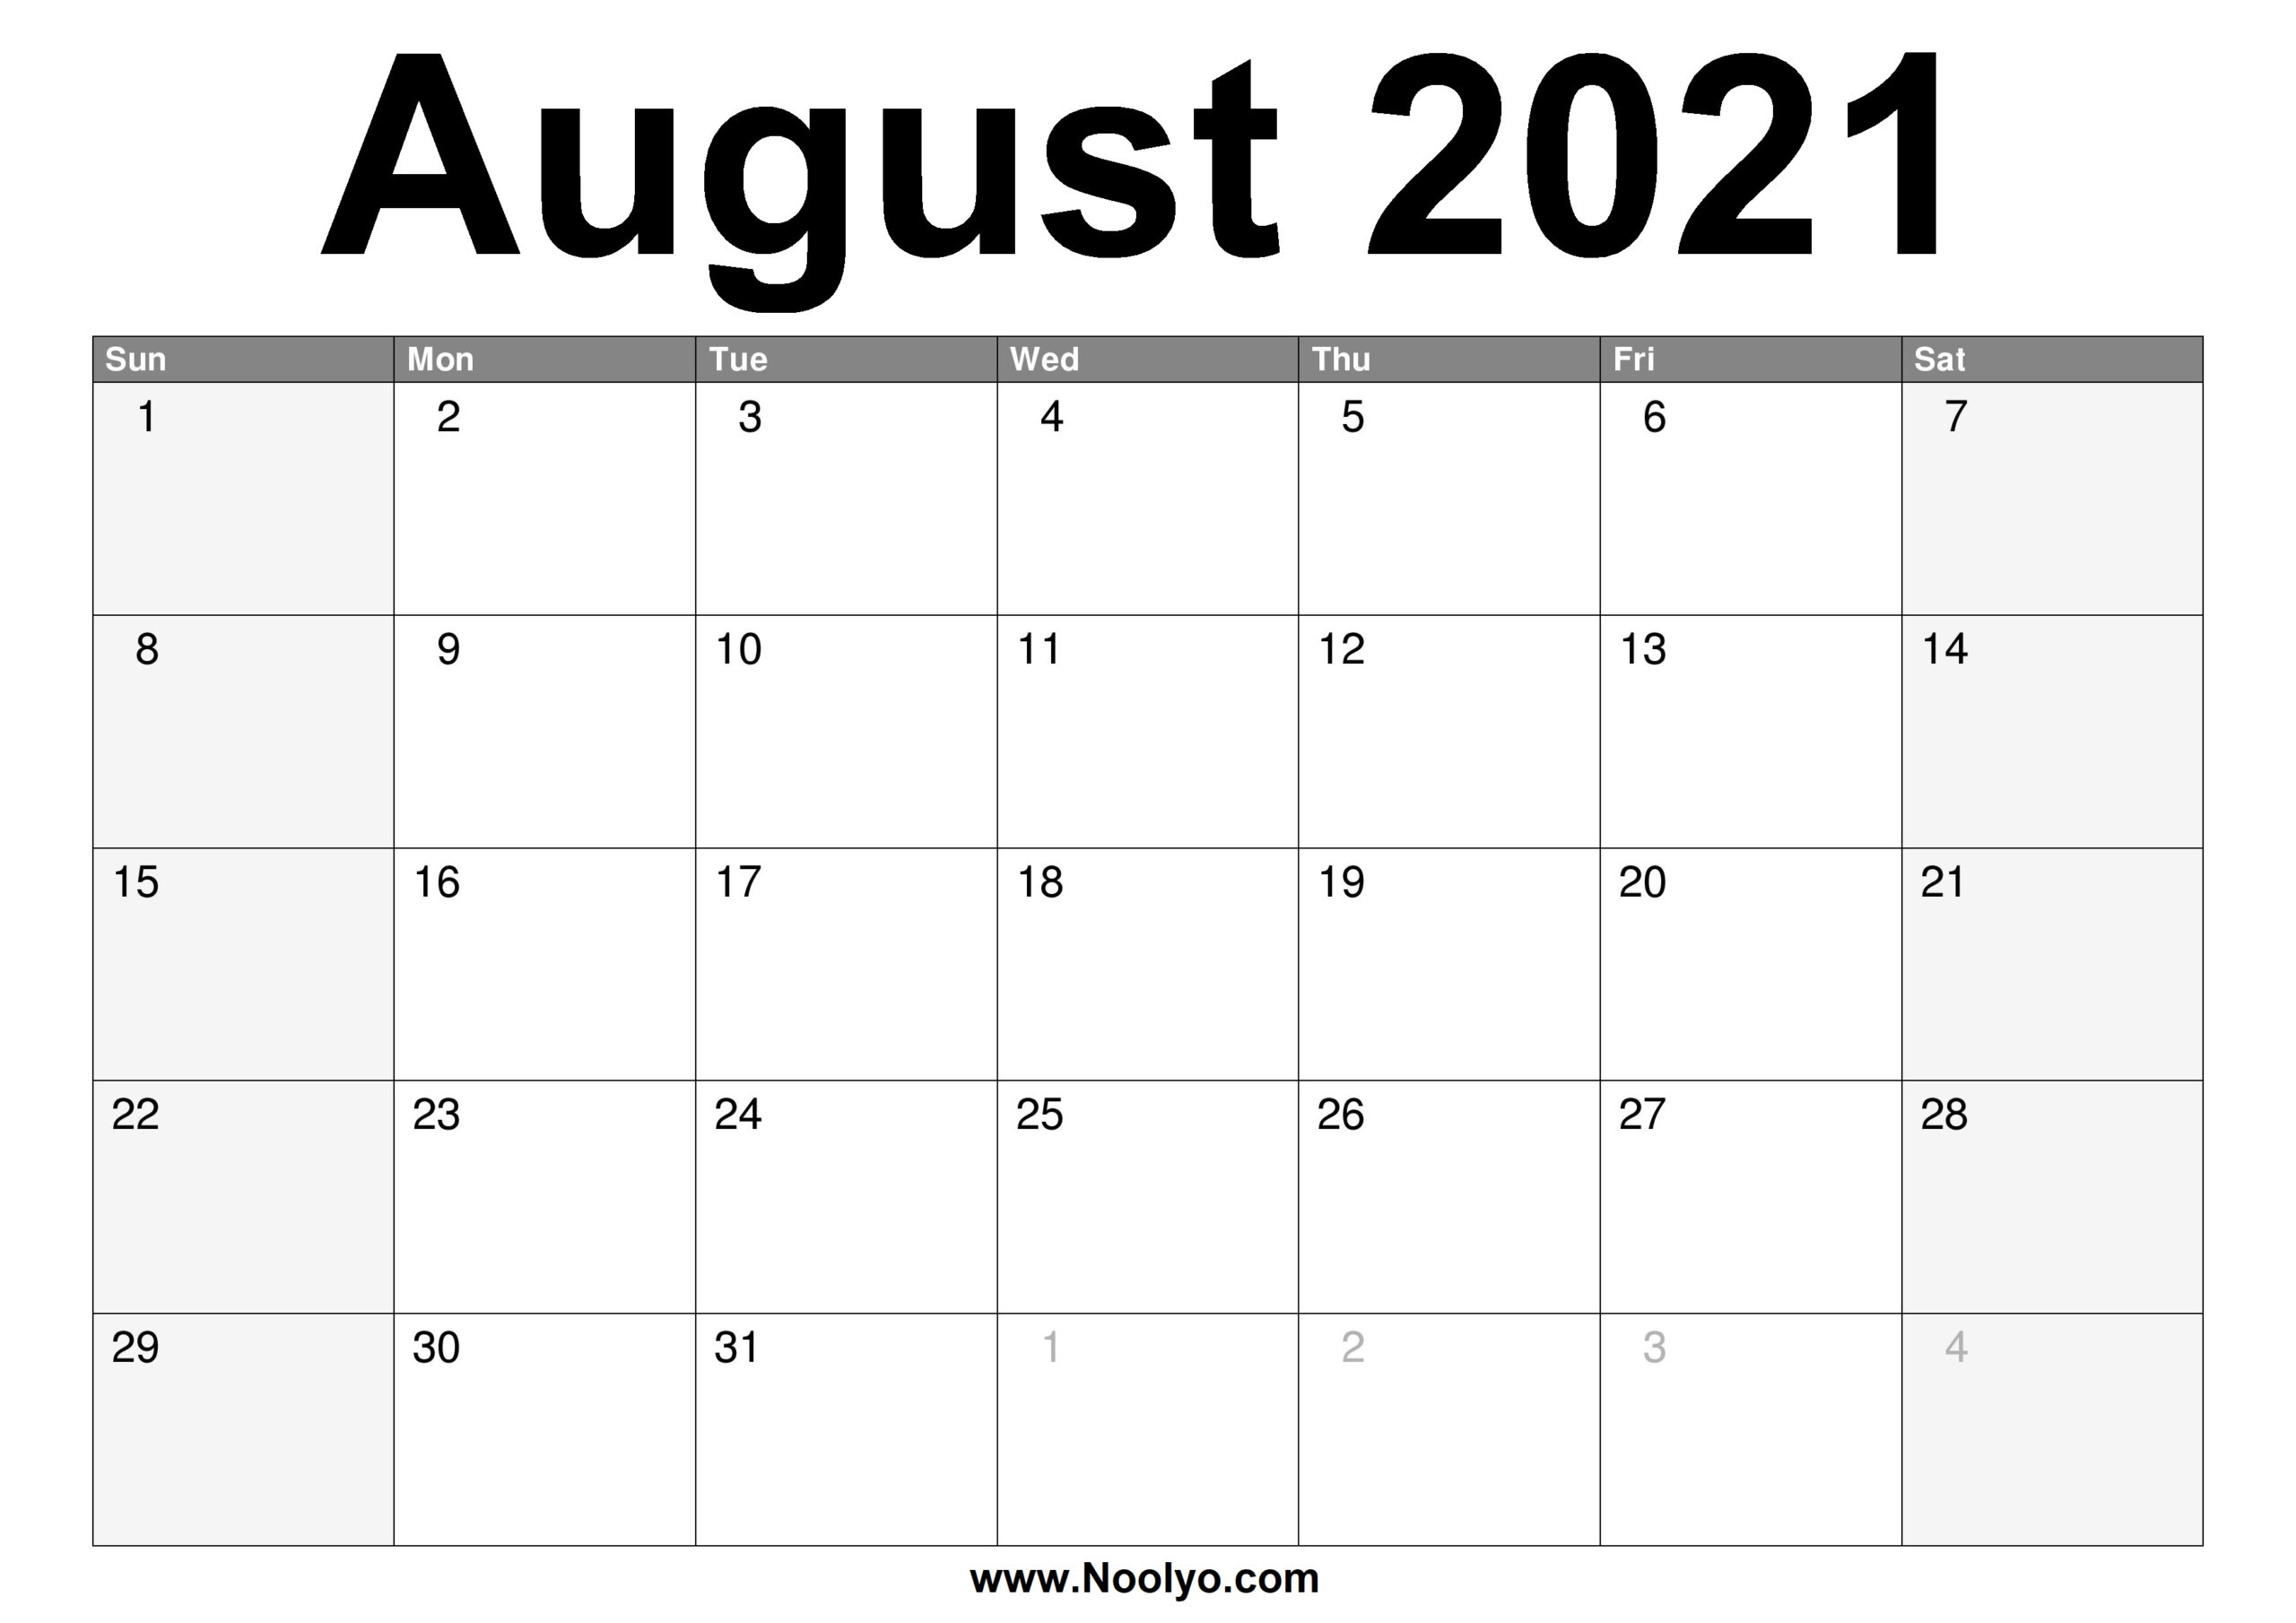 Calendar Of August 2021 | Printable Calendars 2021-Print Free Calendars Without Downloading 2021